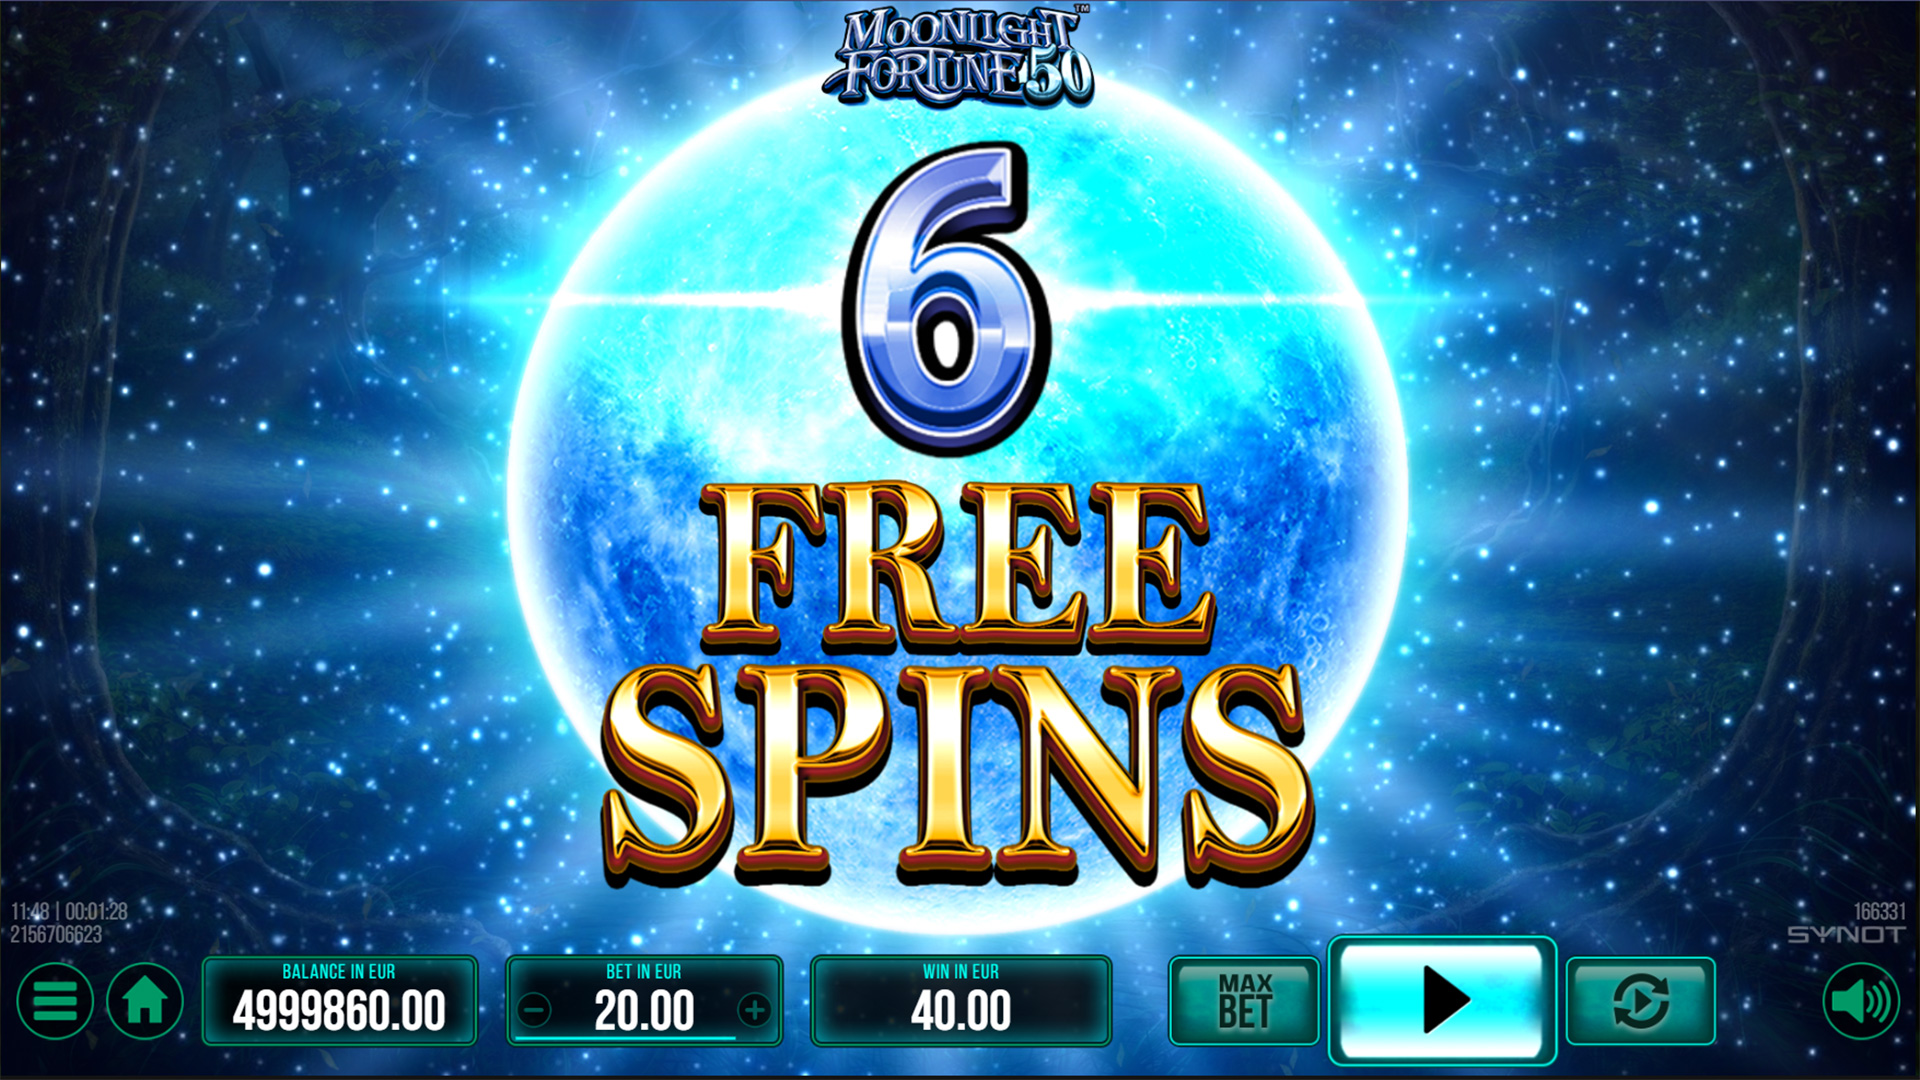 Moonlight Fortune 50 Free Spins